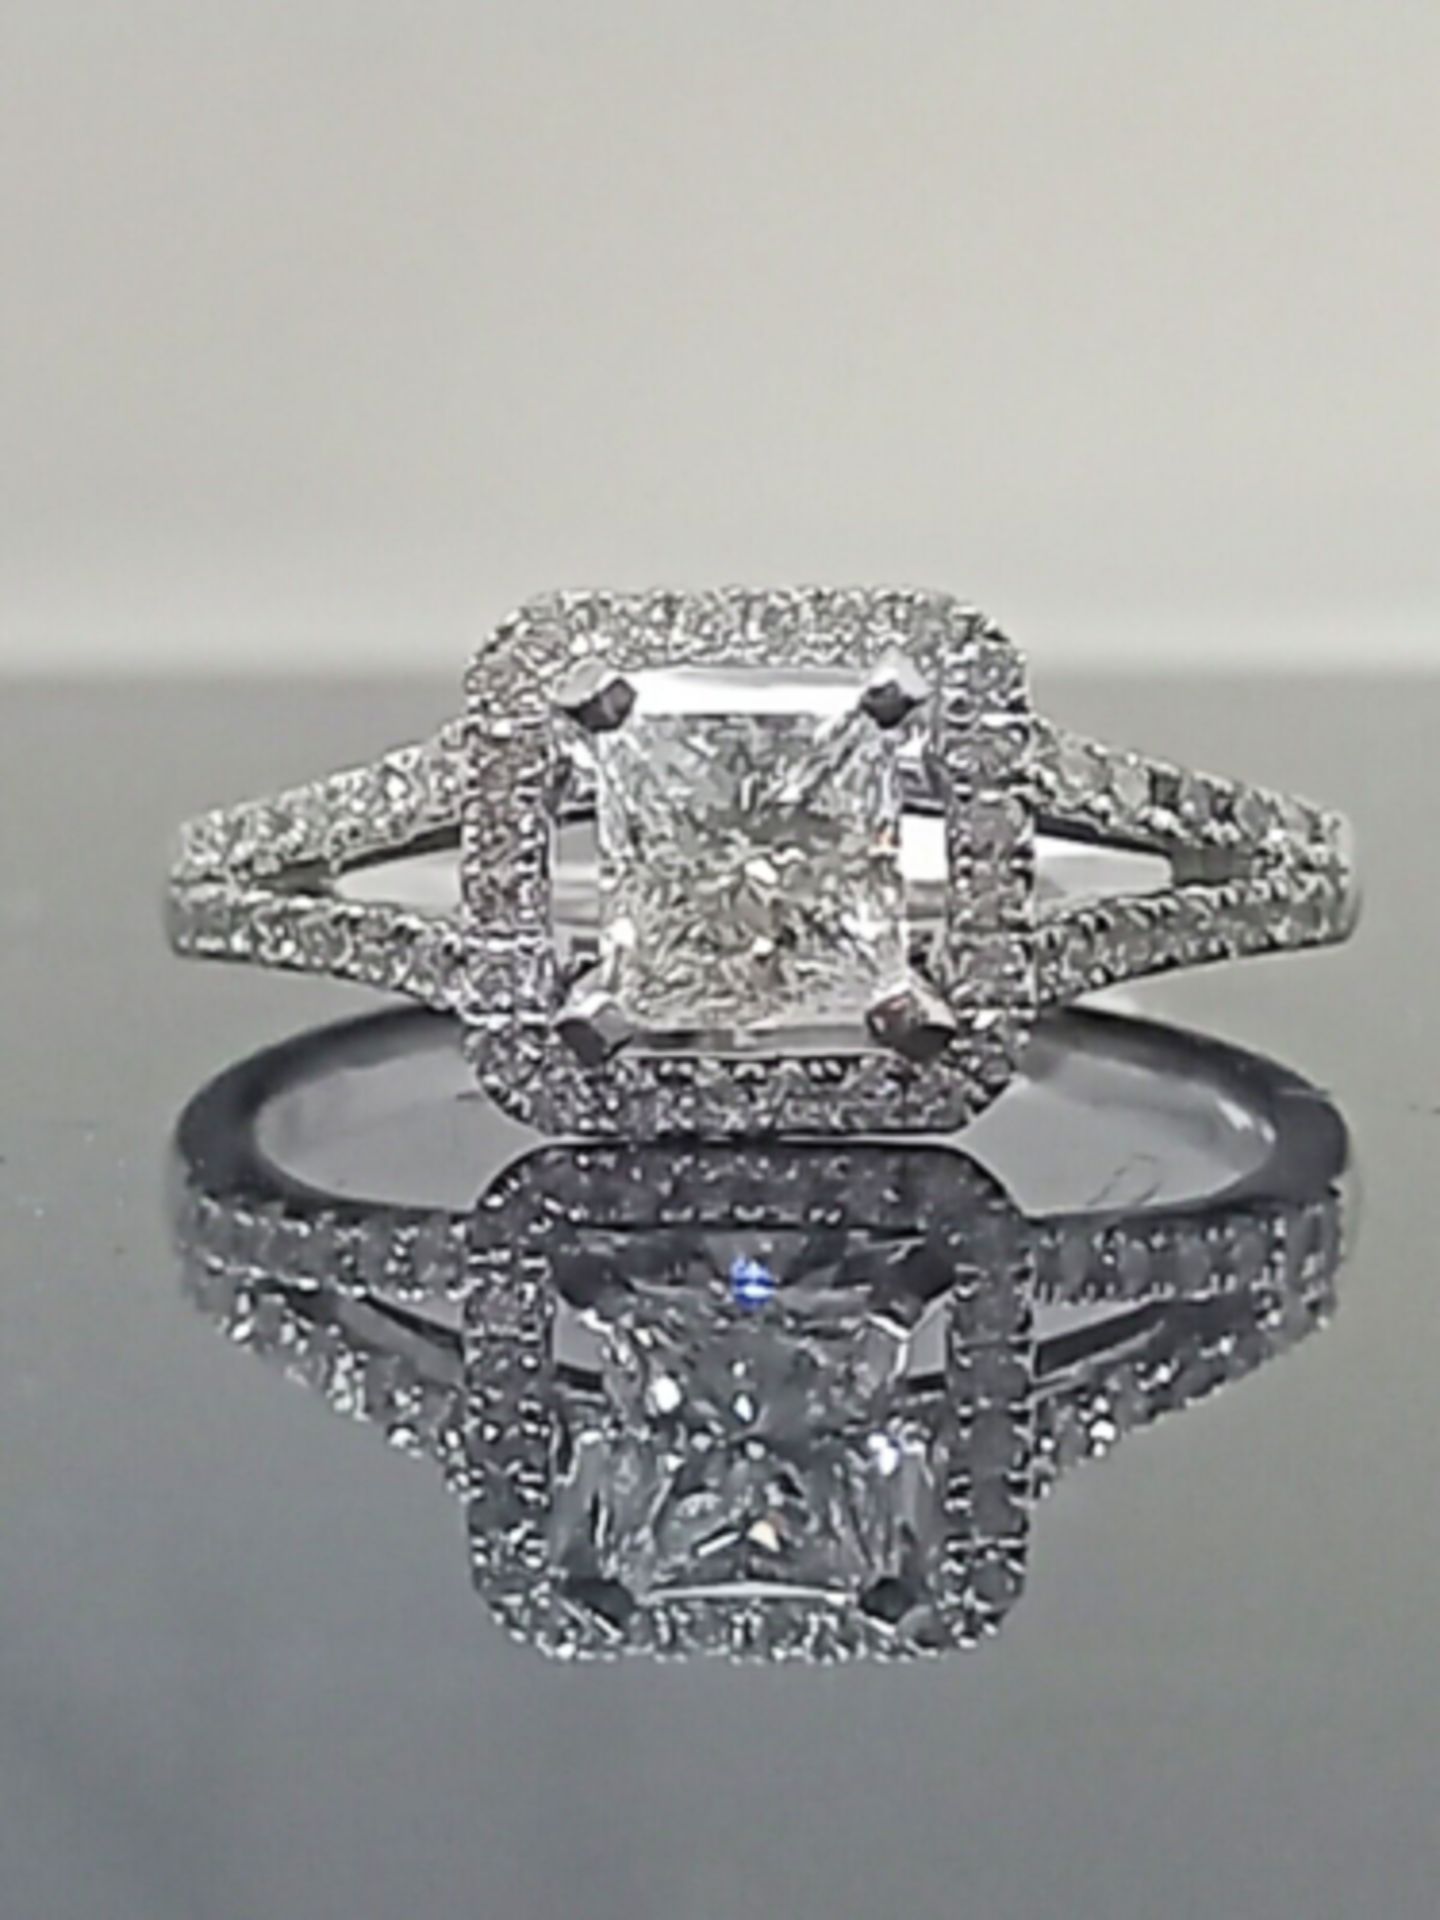 1.05CT PRINCESS CUT DIAMOND HALO ENGAGEMENT RING/18CT WHITE GOLD +GIFT BOX + VALUATION CERT OF £5500